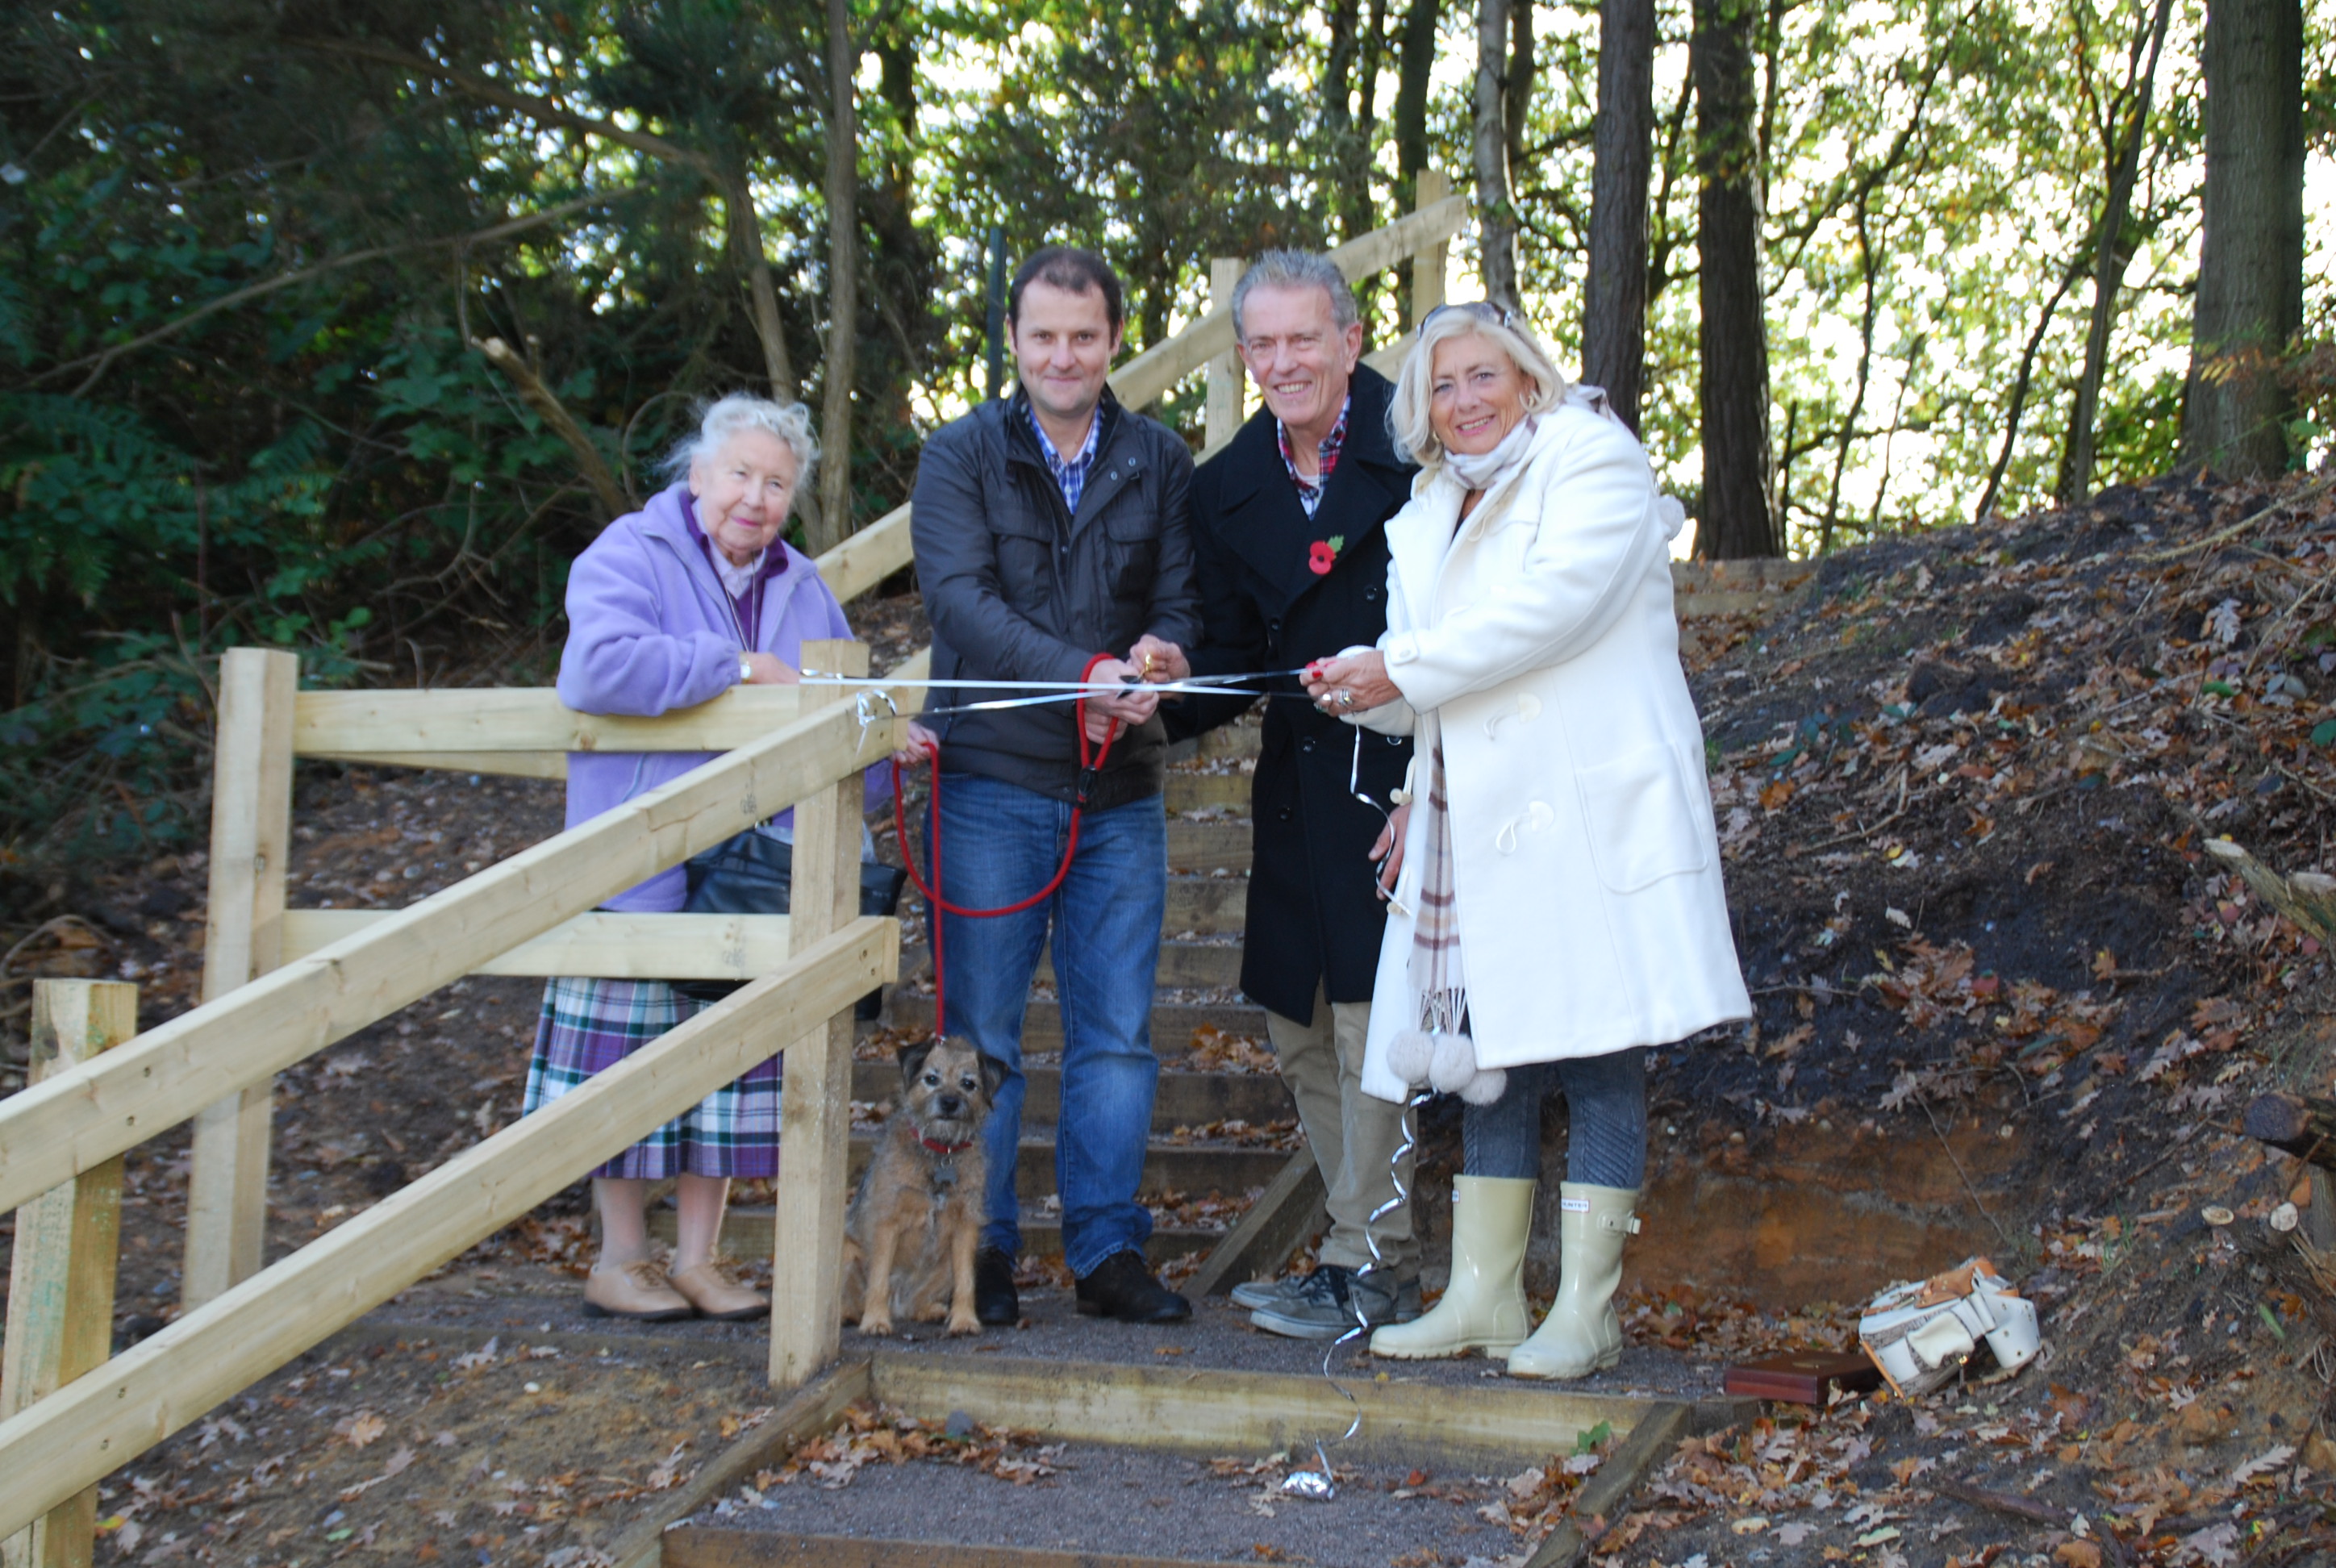 The unveiling of the new steps to link footpaths